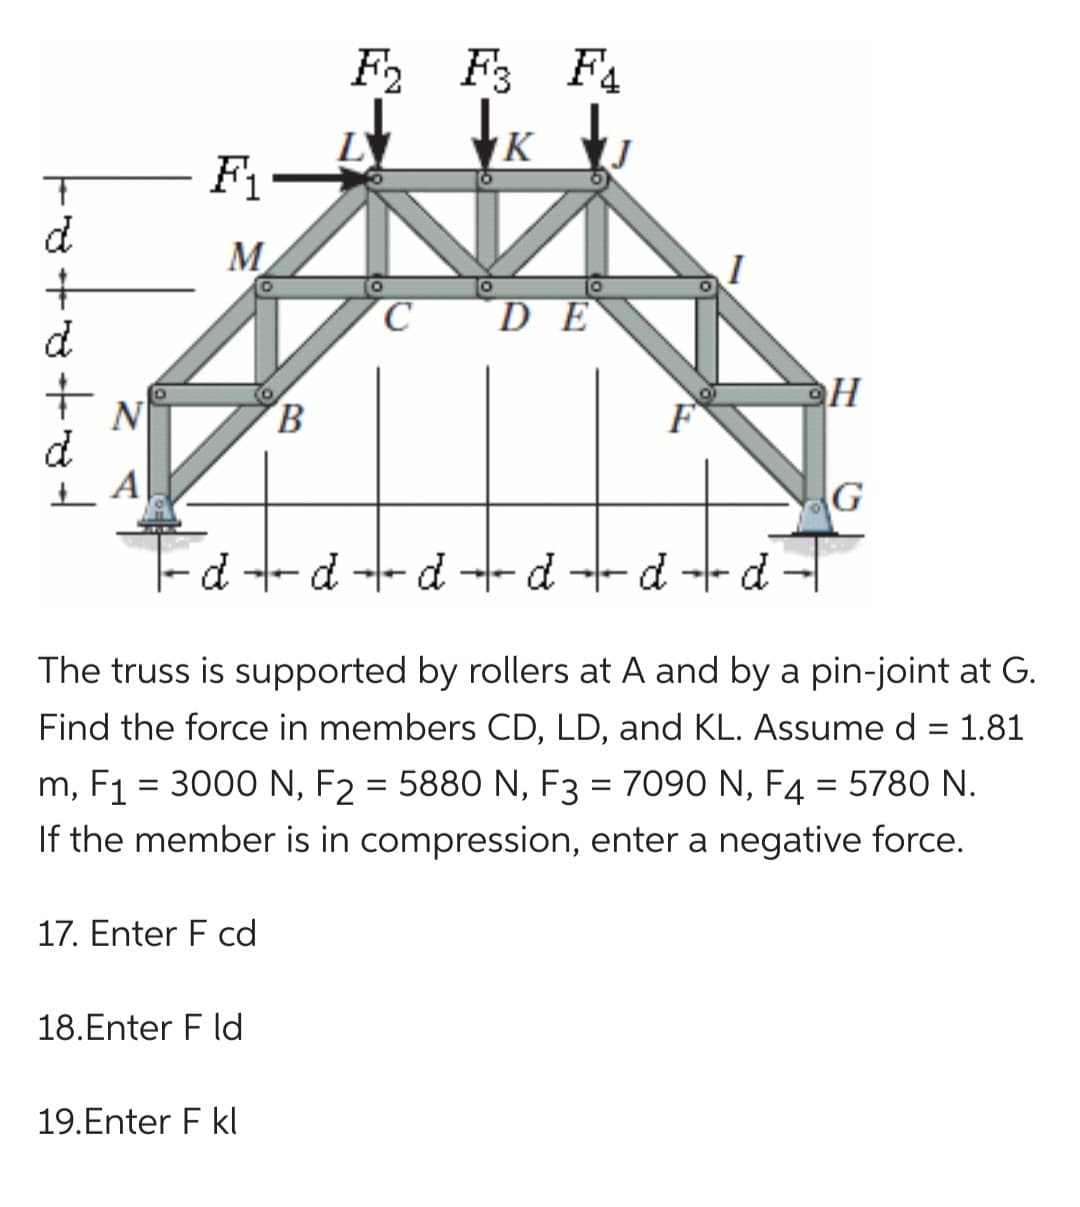 d
+
d
+
d
N
F₁
M
17. Enter F cd
O
18.Enter F ld
DE
LL
dddddd
19.Enter F kl
O
F2 F3 F₁
K
B
C
I
The truss is supported by rollers at A and by a pin-joint at G.
Find the force in members CD, LD, and KL. Assume d = 1.81
m, F1 = 3000 N, F2 = 5880 N, F3 = 7090 N, F4 = 5780 N.
If the member is in compression, enter a negative force.
H
G